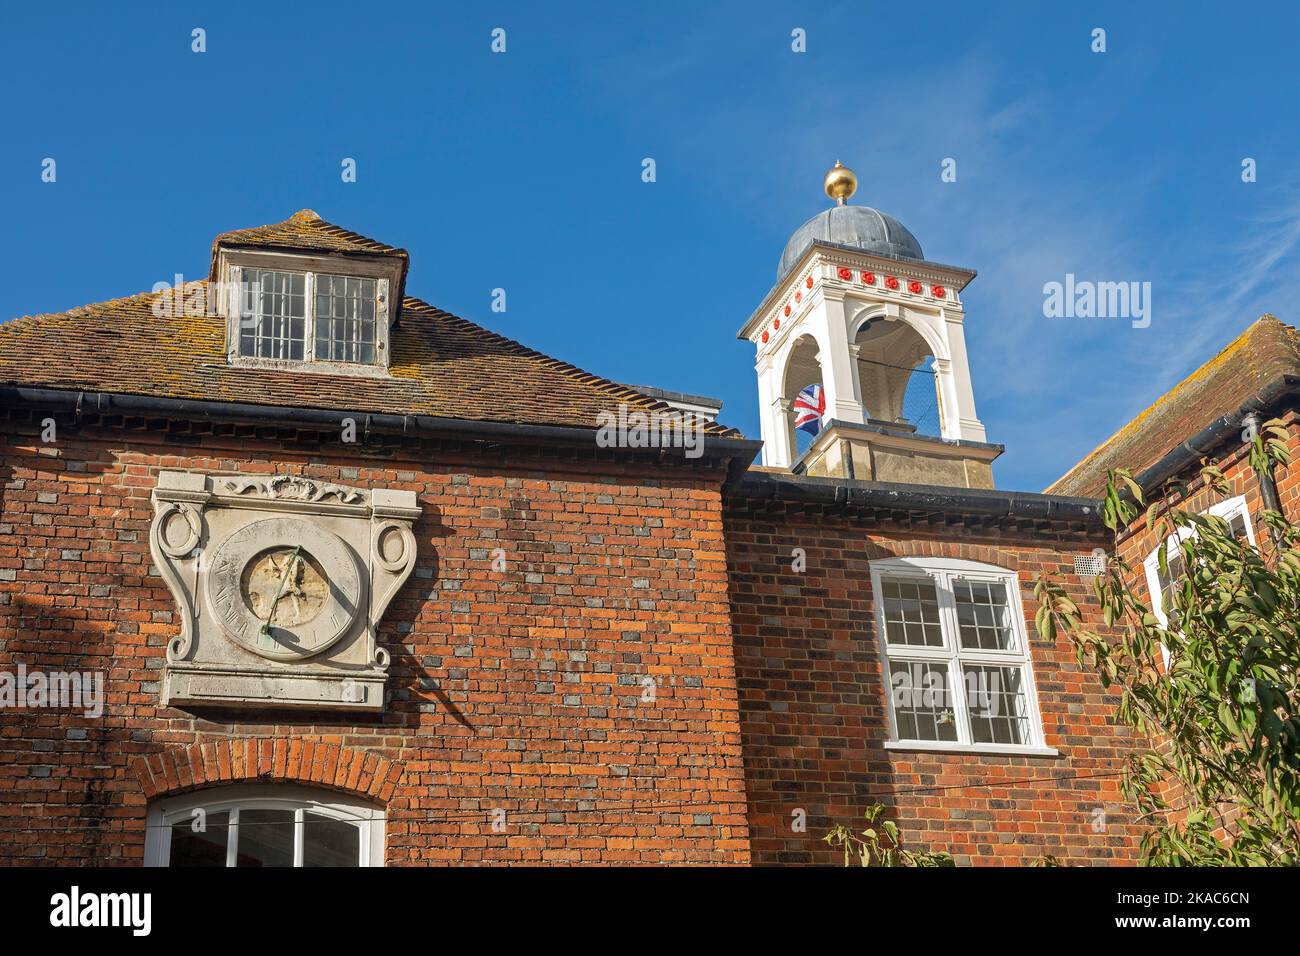 Sun dial, Town Hall, Rye, East Sussex, England, Great Britain Stock Photo